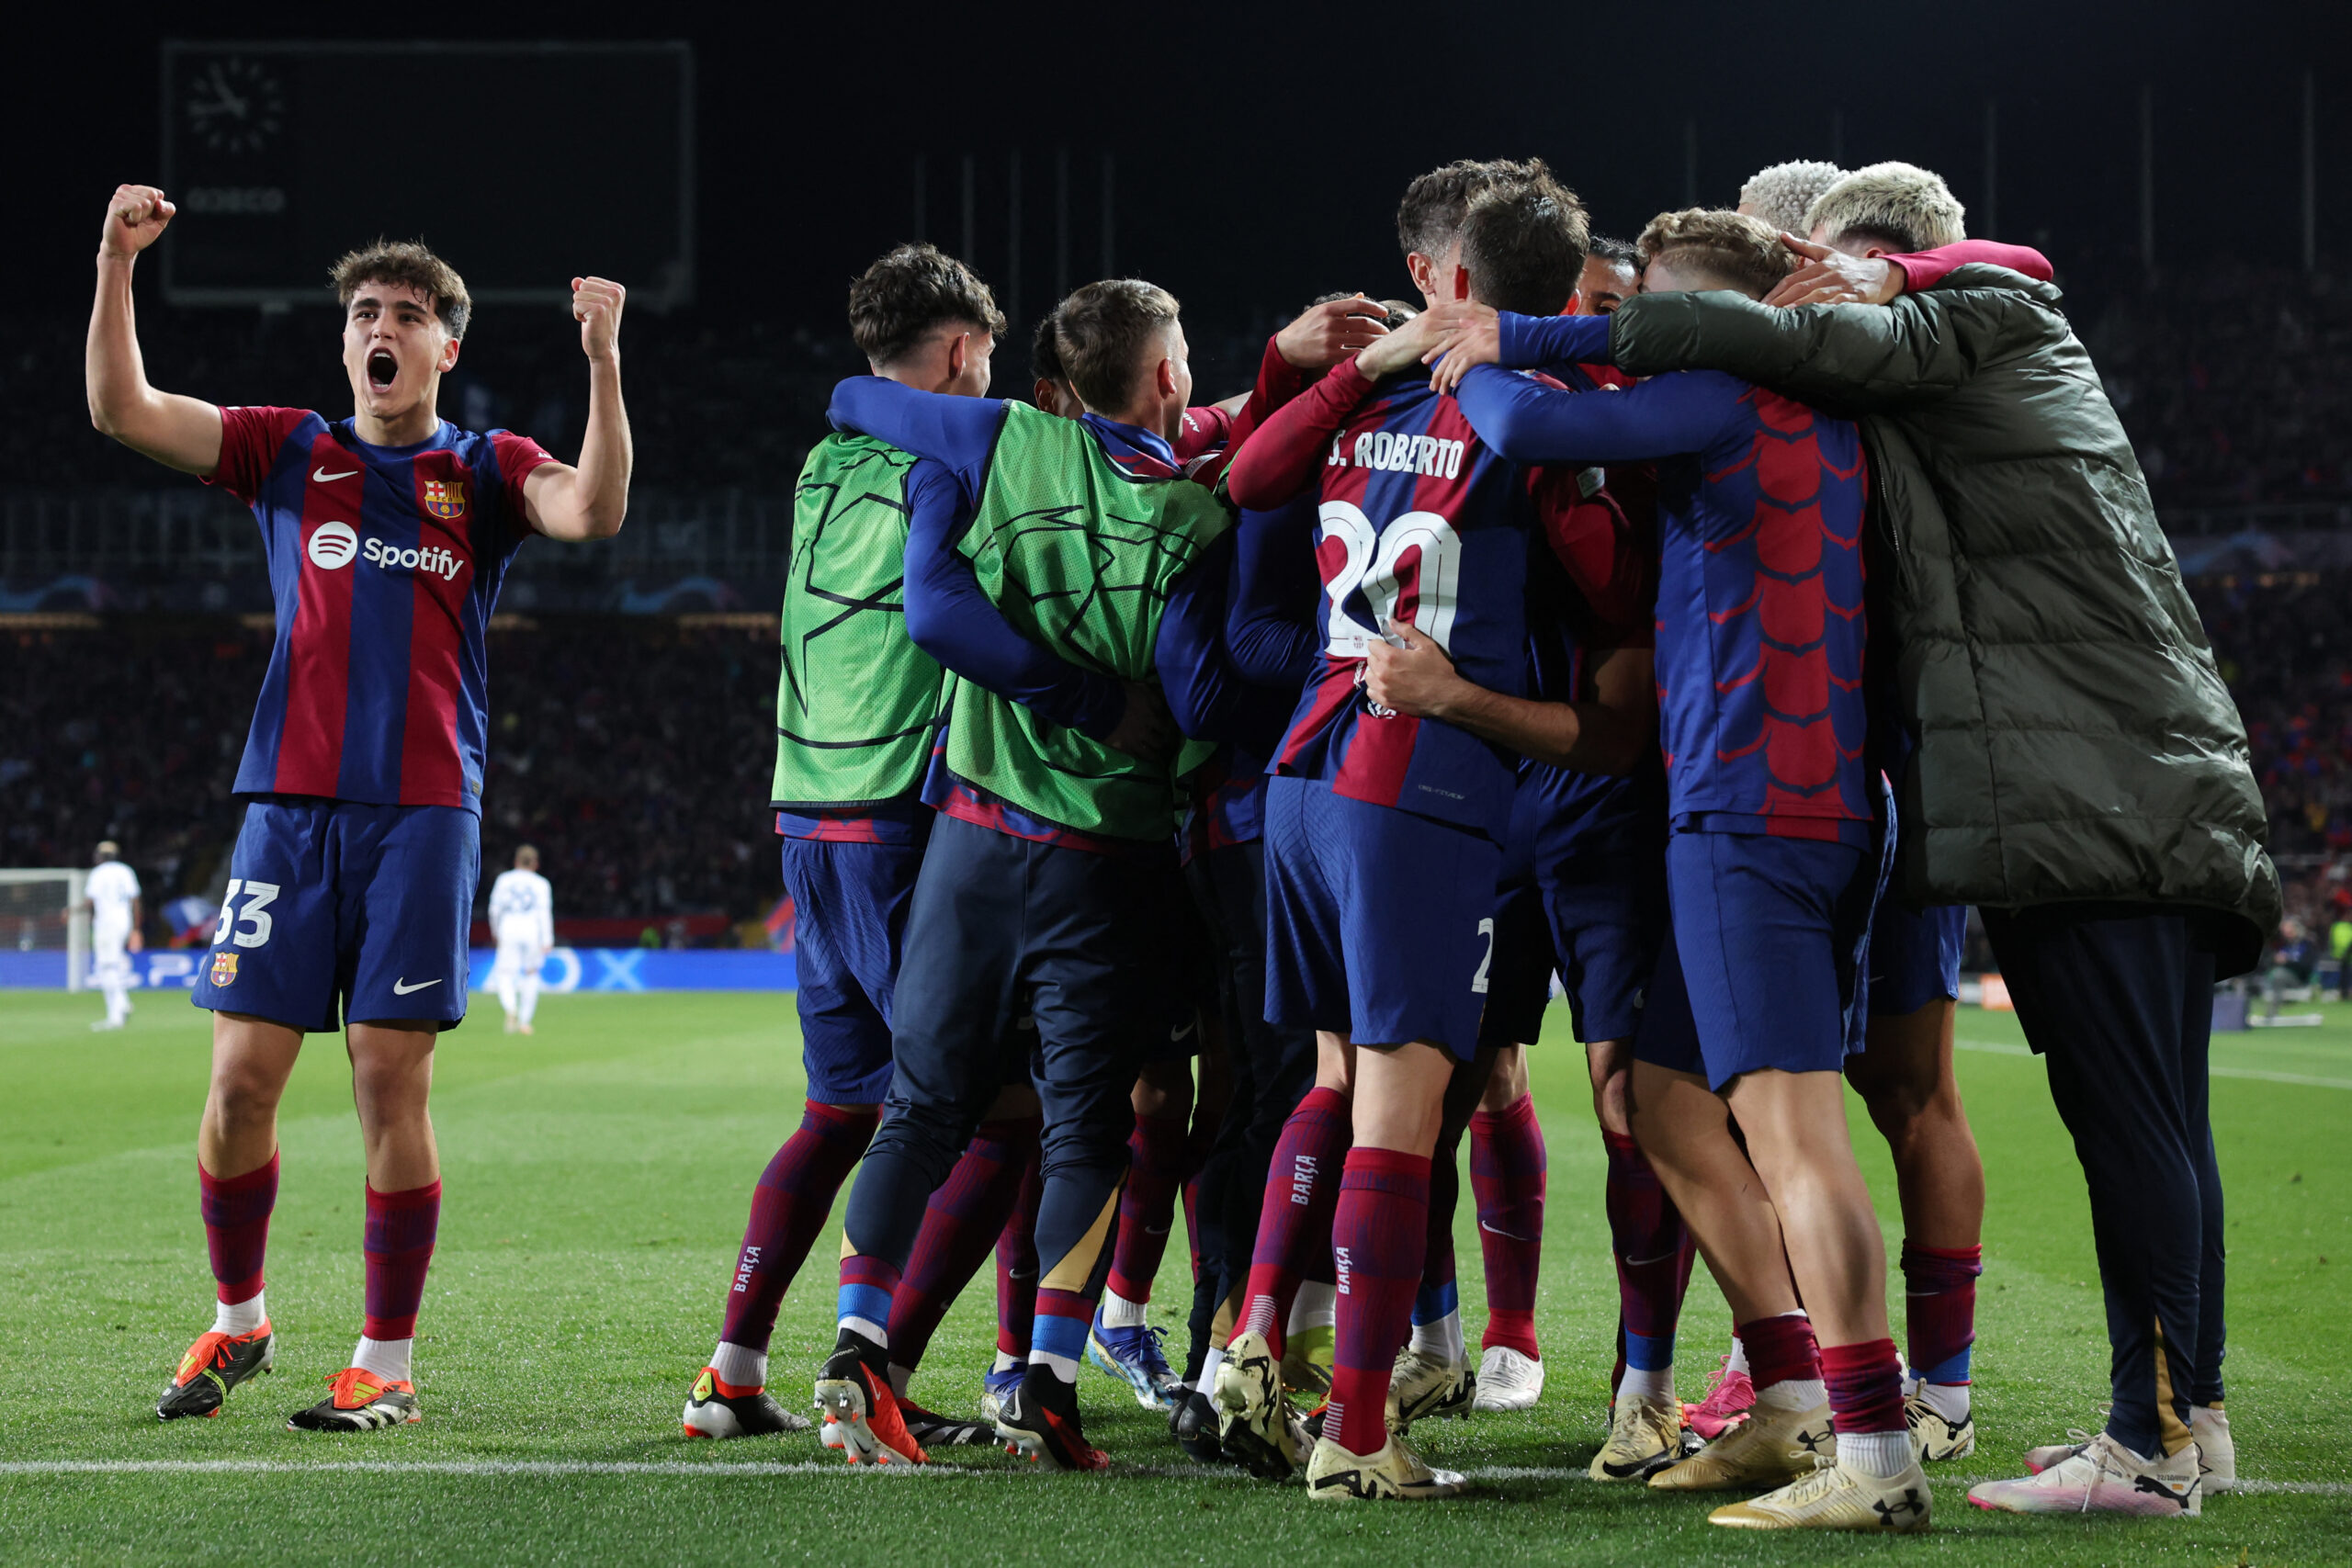 Barcelona players celebrate their third goal scored by Barcelona's Polish forward #09 Robert Lewandowski during the UEFA Champions League last 16 second leg football match between FC Barcelona and SSC Napoli at the Estadi Olimpic Lluis Companys in Barcelona on March 12, 2024.